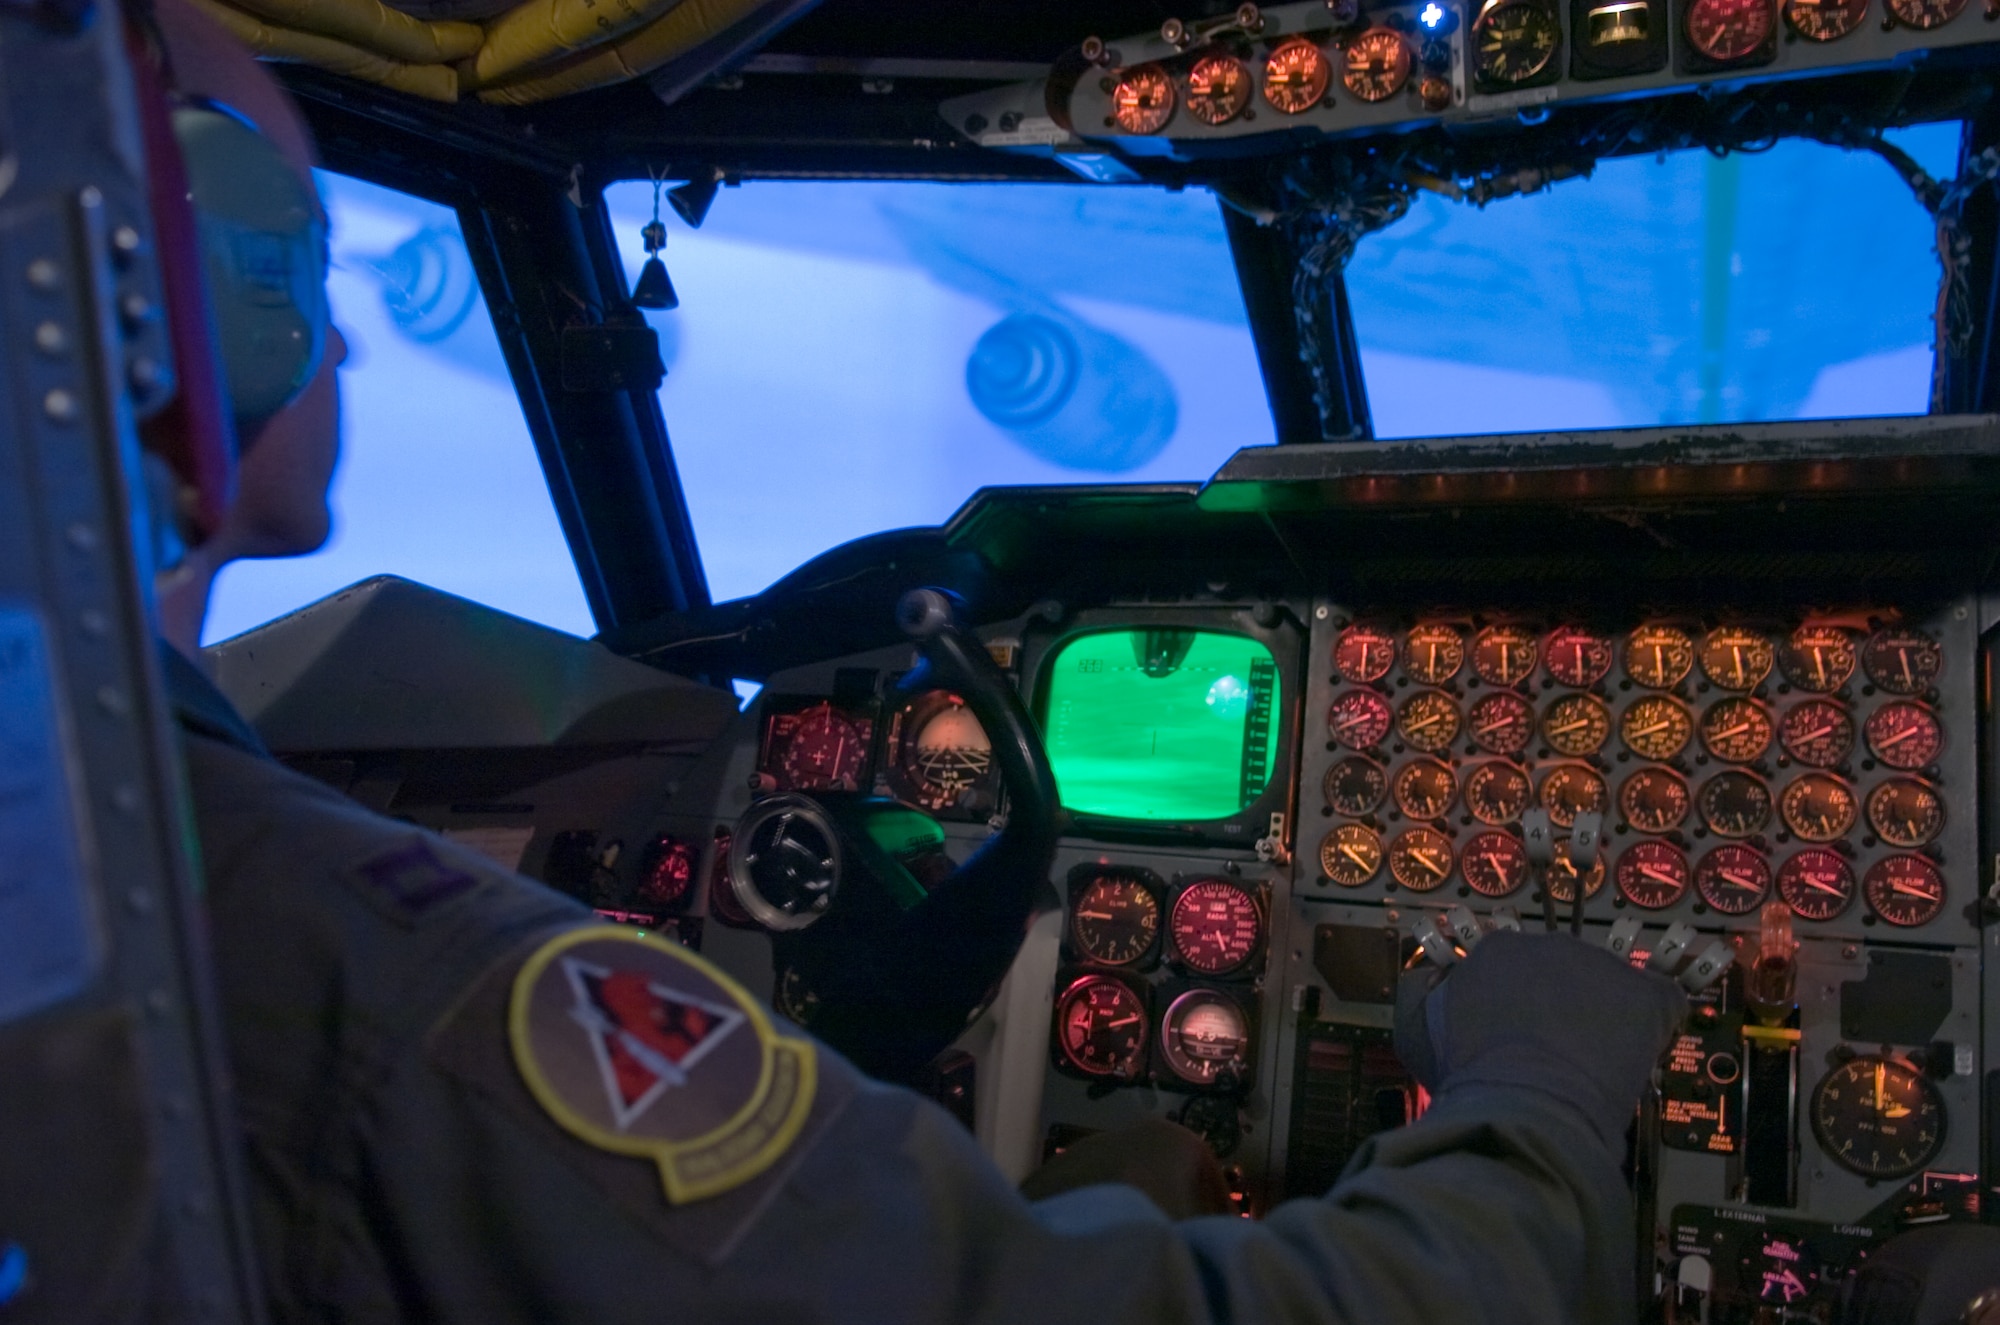 Capt. Joseph Babboni trains on a B-52 Stratofortress simulator April 28 at Barksdale Air Force Base, La. to improve his proficiency at air refueling. An actual flight in a B-52 bomber costs approximately $16,000 per hour. The flight simulator costs approximately $400 per hour to operate. Despite the cost savings, not all training can be a conducted in a simulator. Capt. Babboni is a pilot with the 11th Bomb Squadron. (U.S. Air Force photo/Lance Cheung)